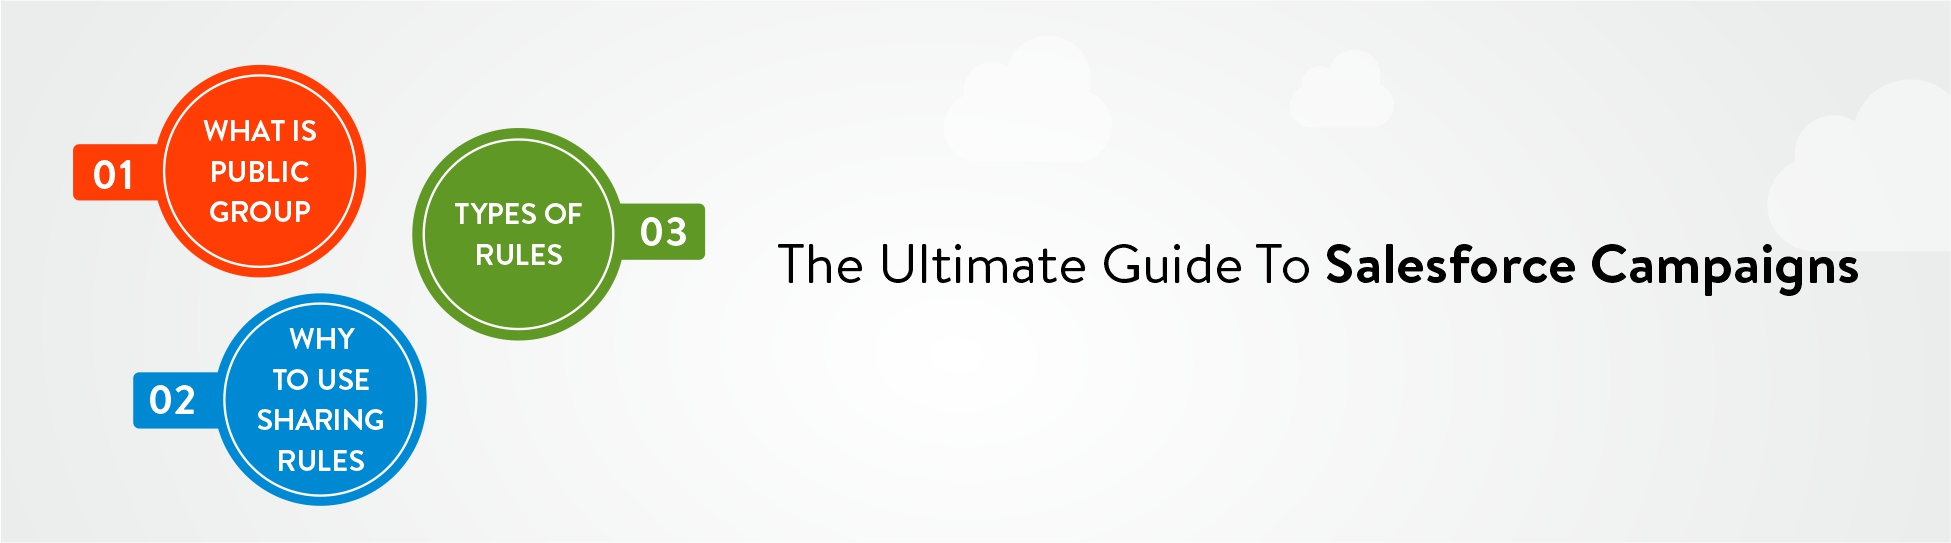 The-Ultimate-Guide-To-Salesforce-Campaigns